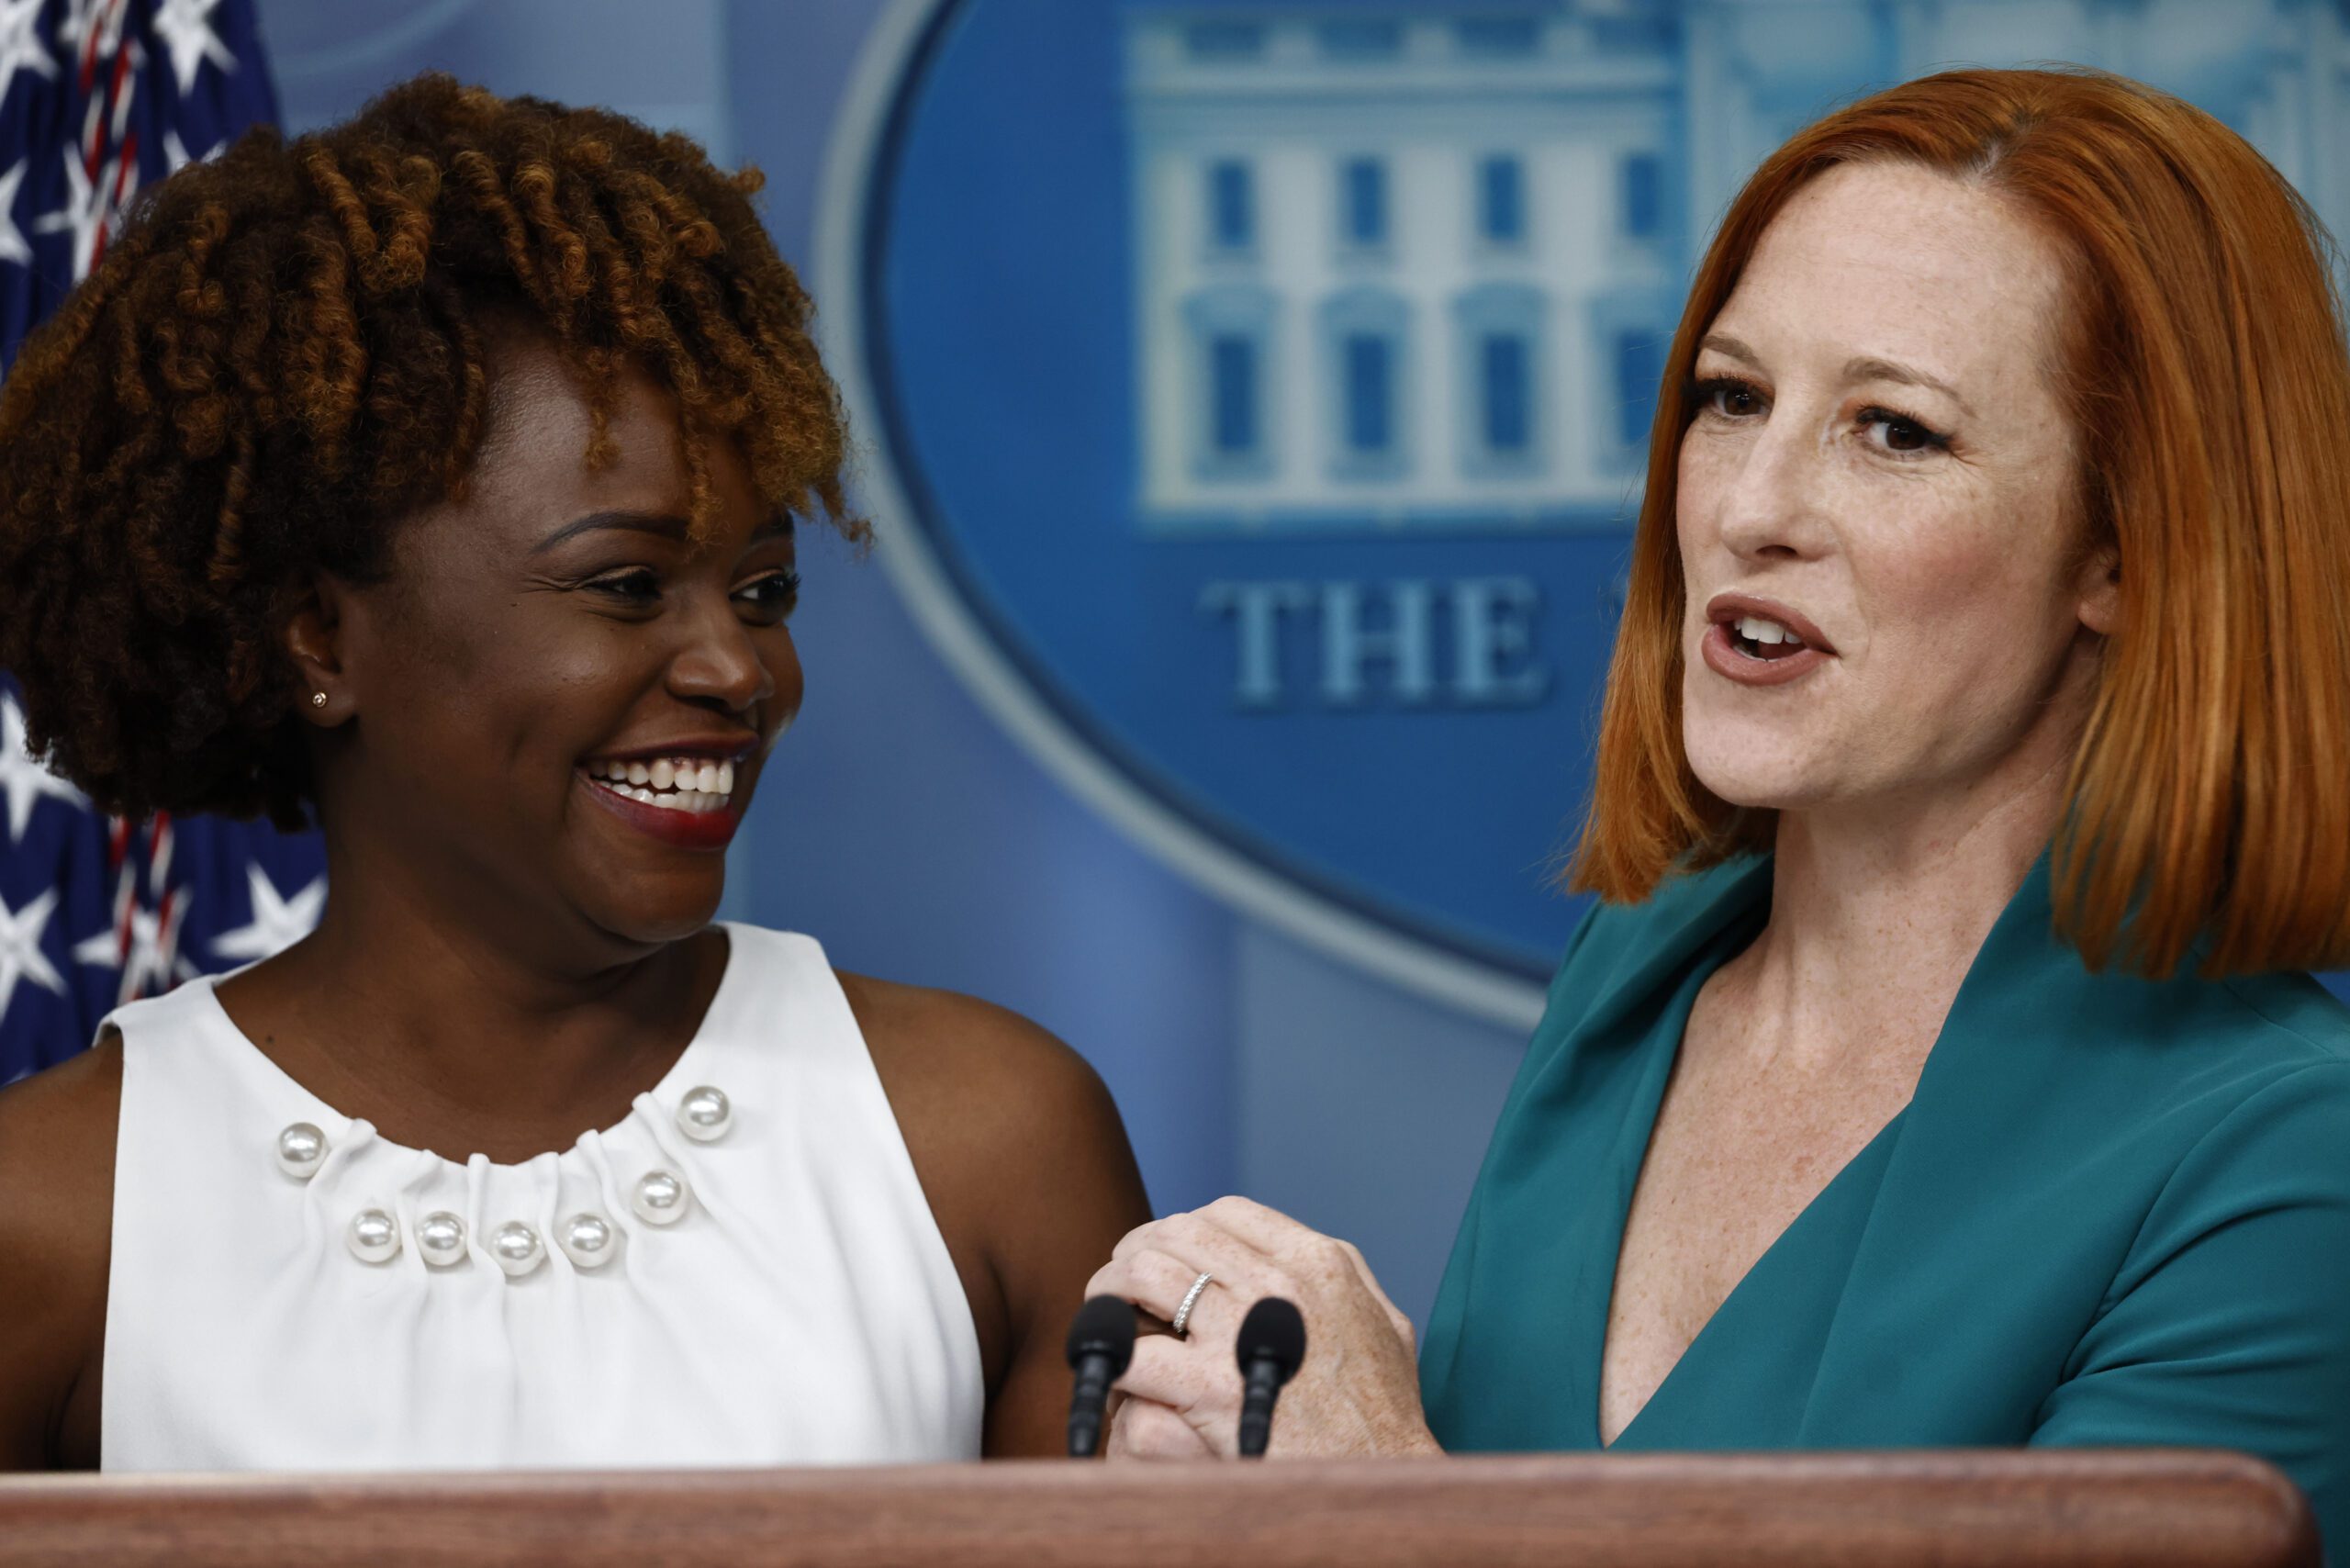 jean-pierre-insists-white-house-‘not-involved’-with-twitter-censorship-psaki-said-the-opposite-last-year.